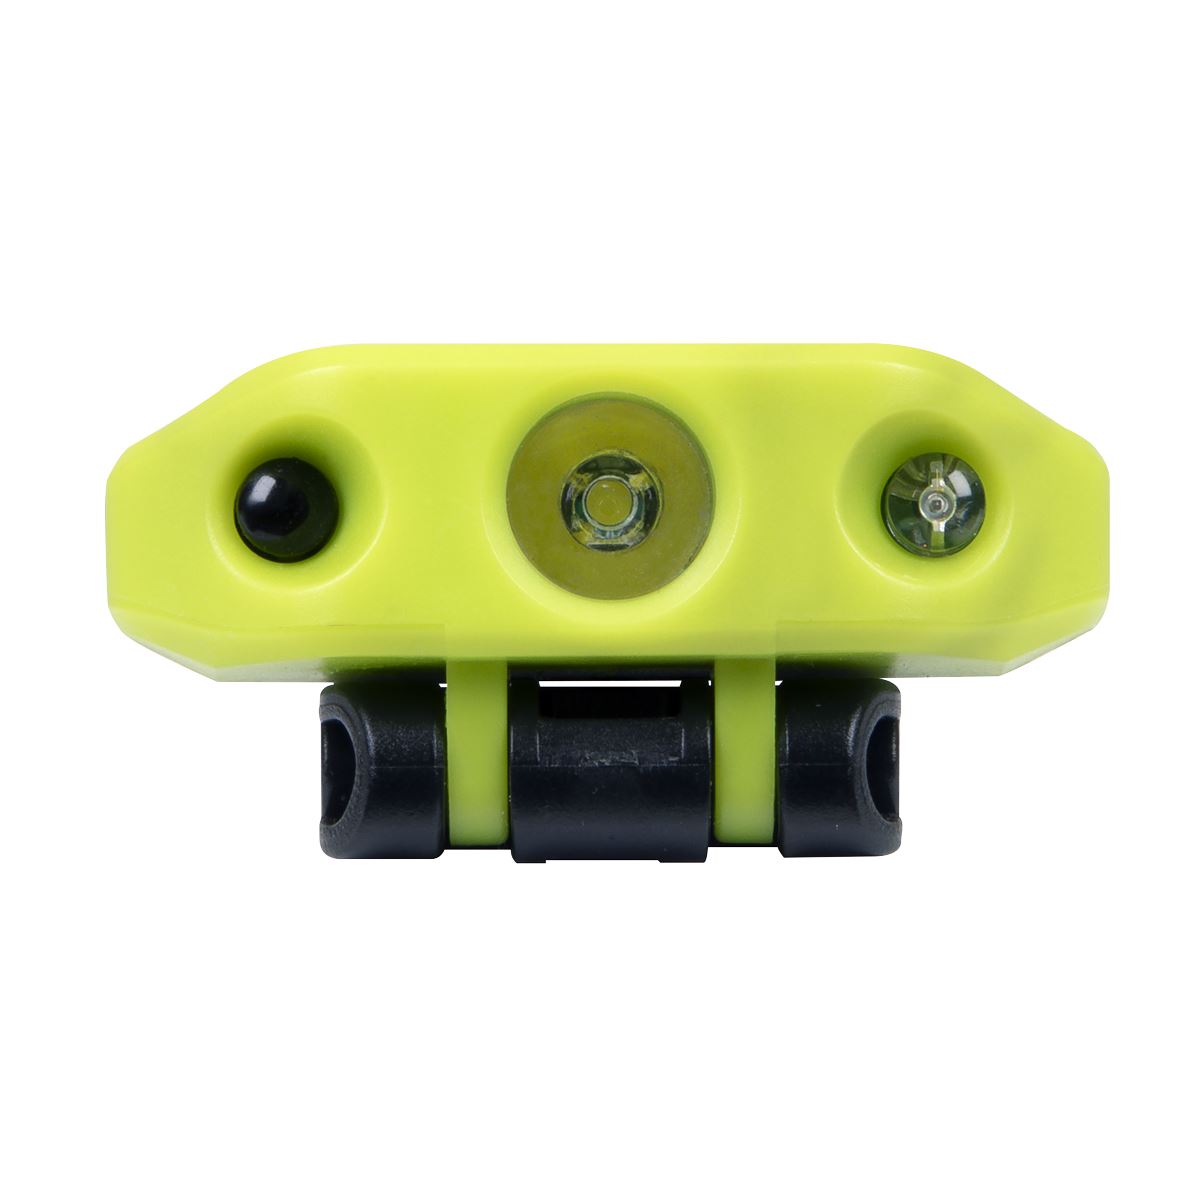 Sealey 2W & 1.5W SMD LED Rechargeable Clip Light with Auto-Sensor